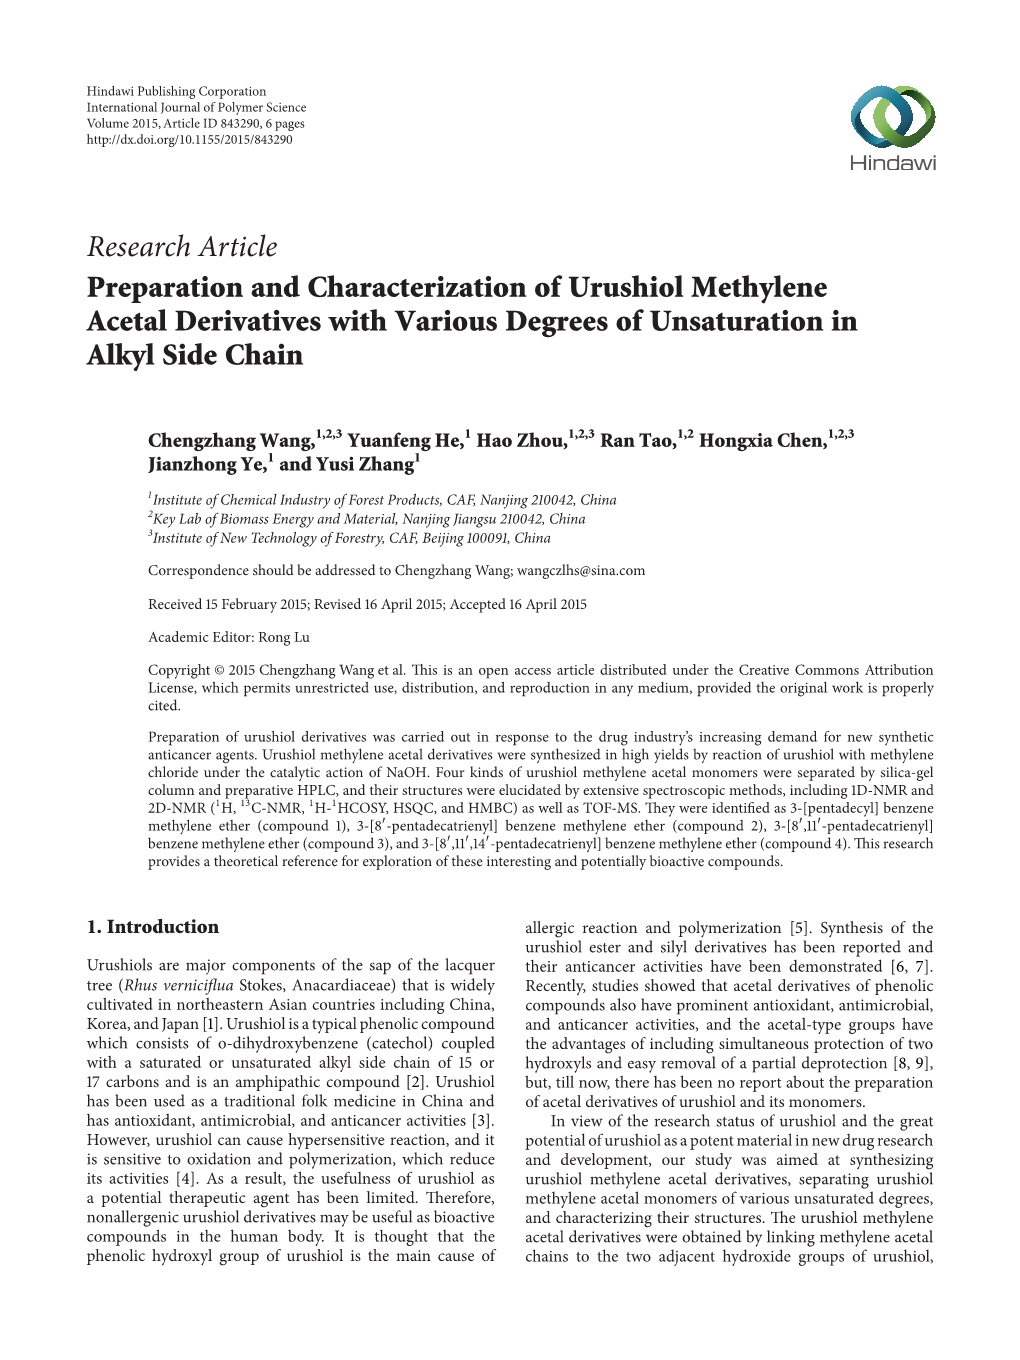 Preparation and Characterization of Urushiol Methylene Acetal Derivatives with Various Degrees of Unsaturation in Alkyl Side Chain